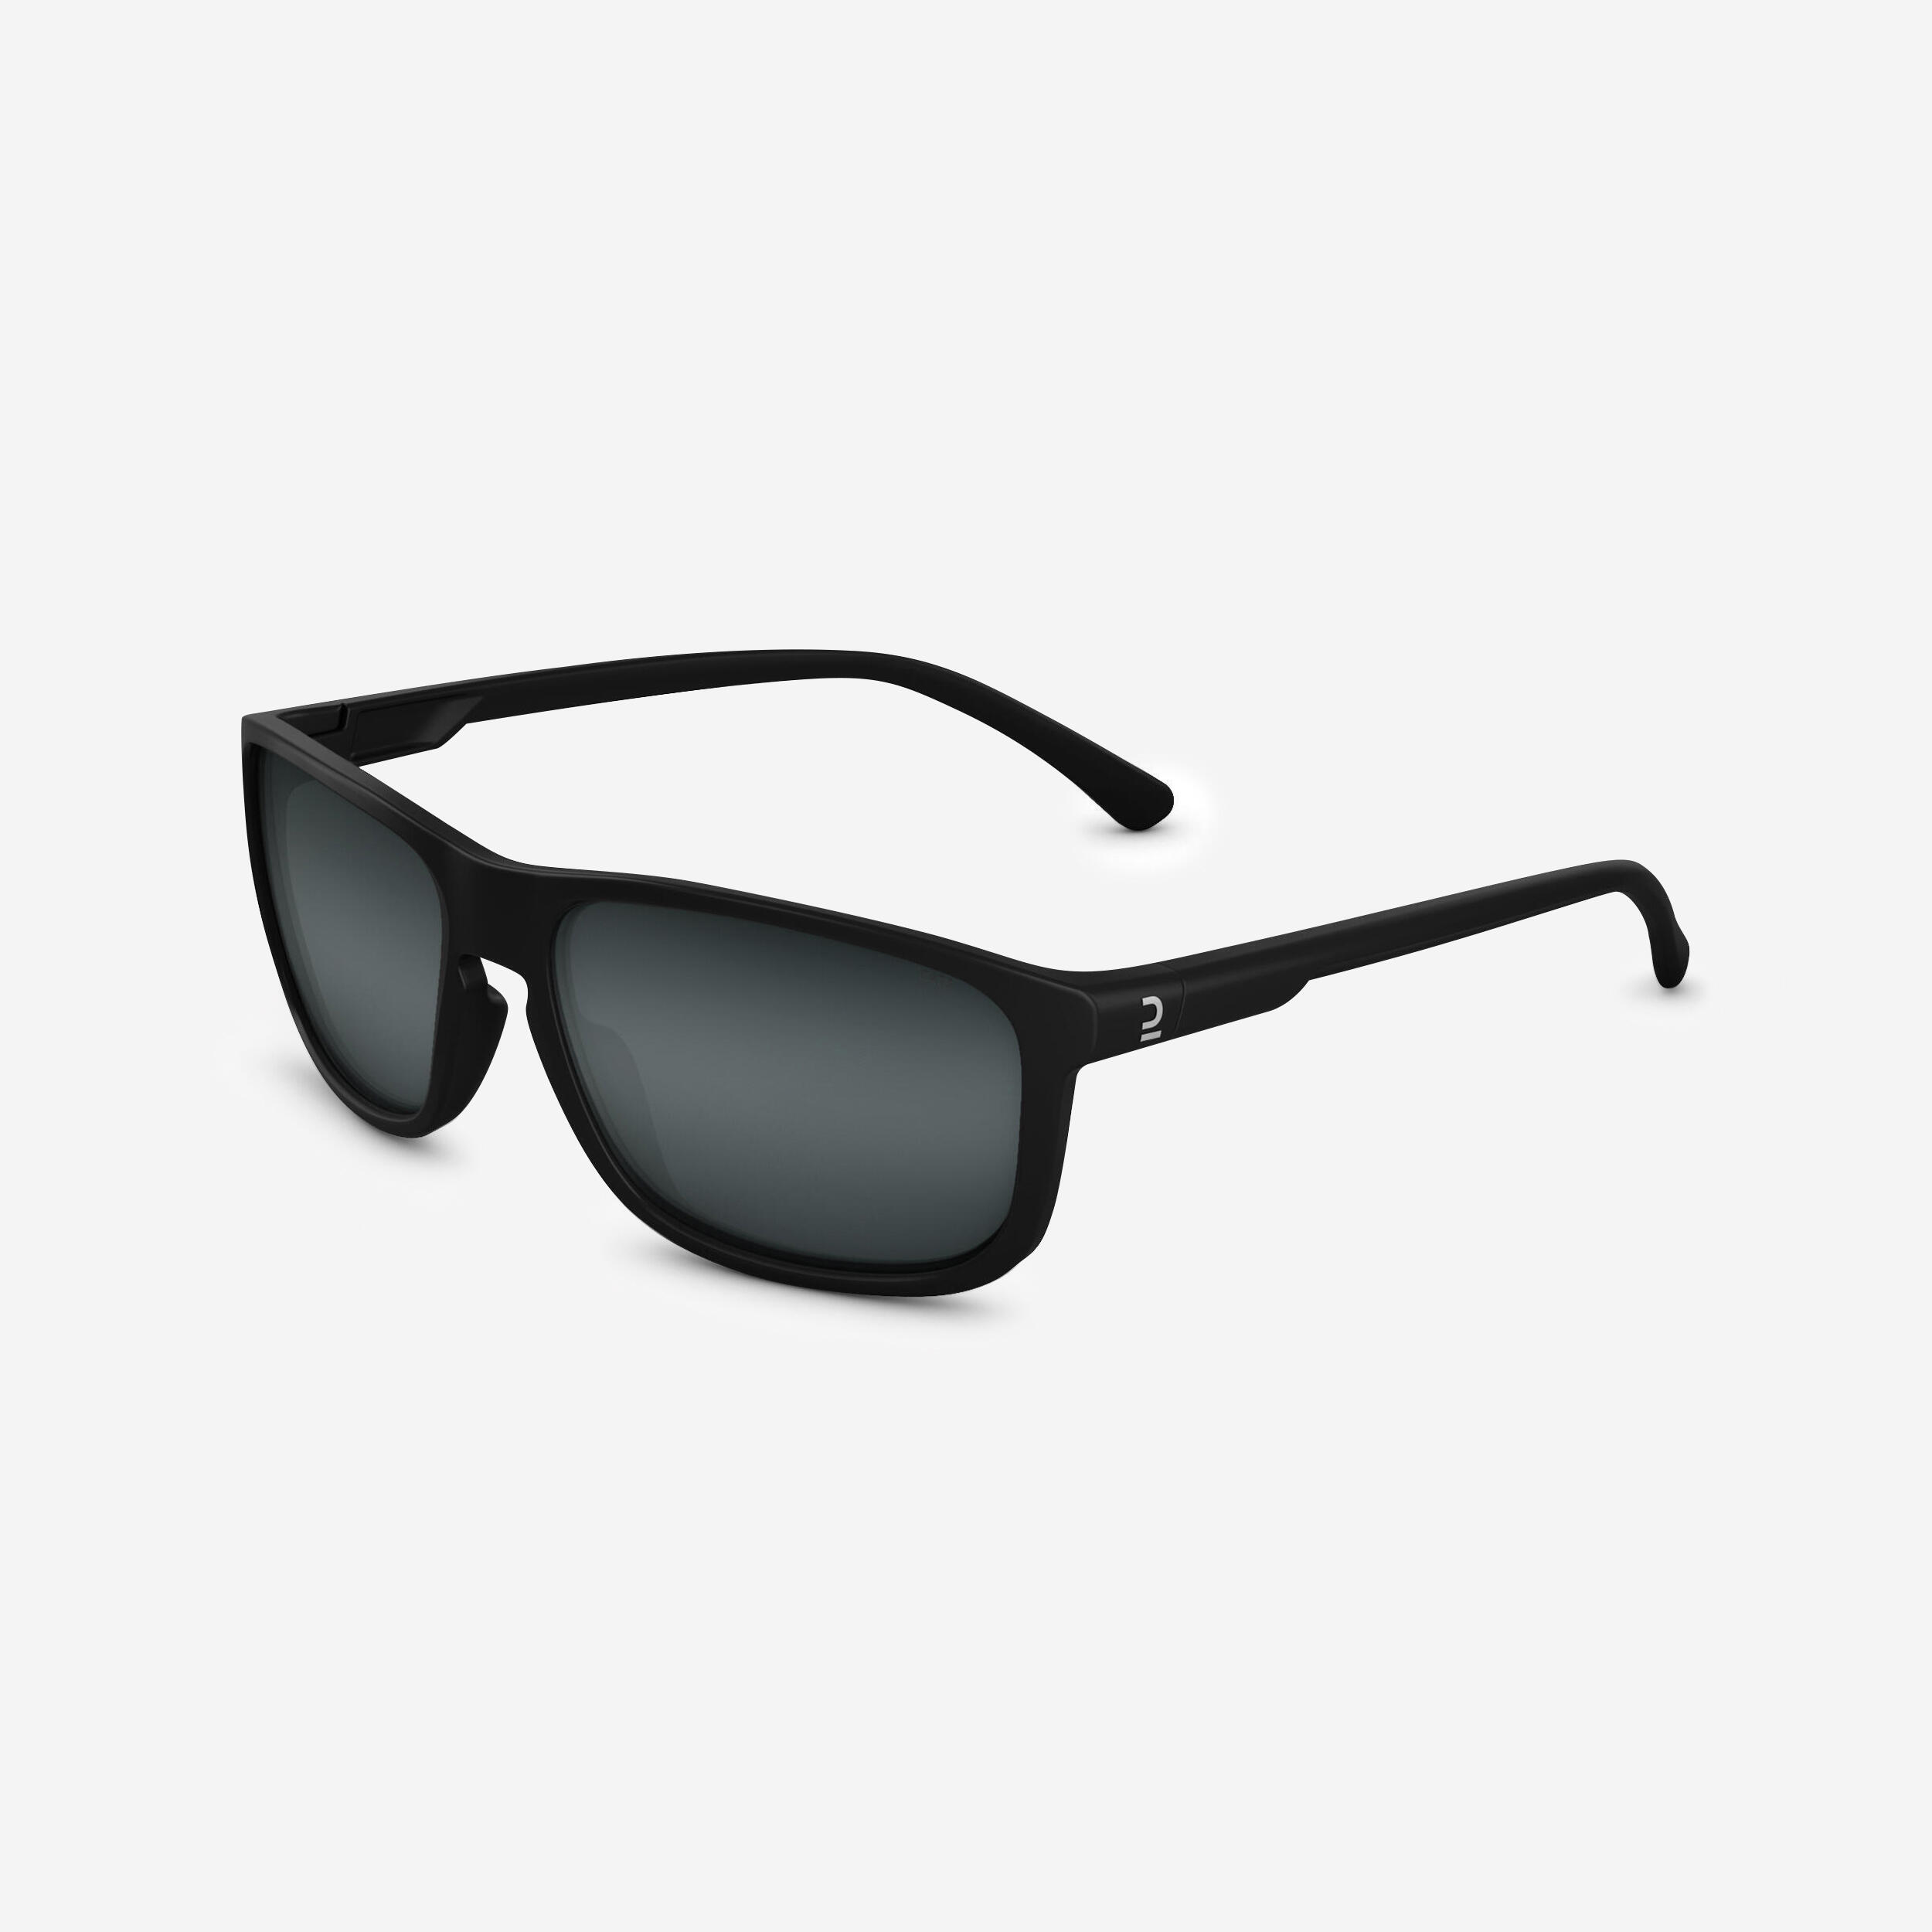 QUECHUA ADULT HIKING SUNGLASSES  MH100  CATEGORY 3